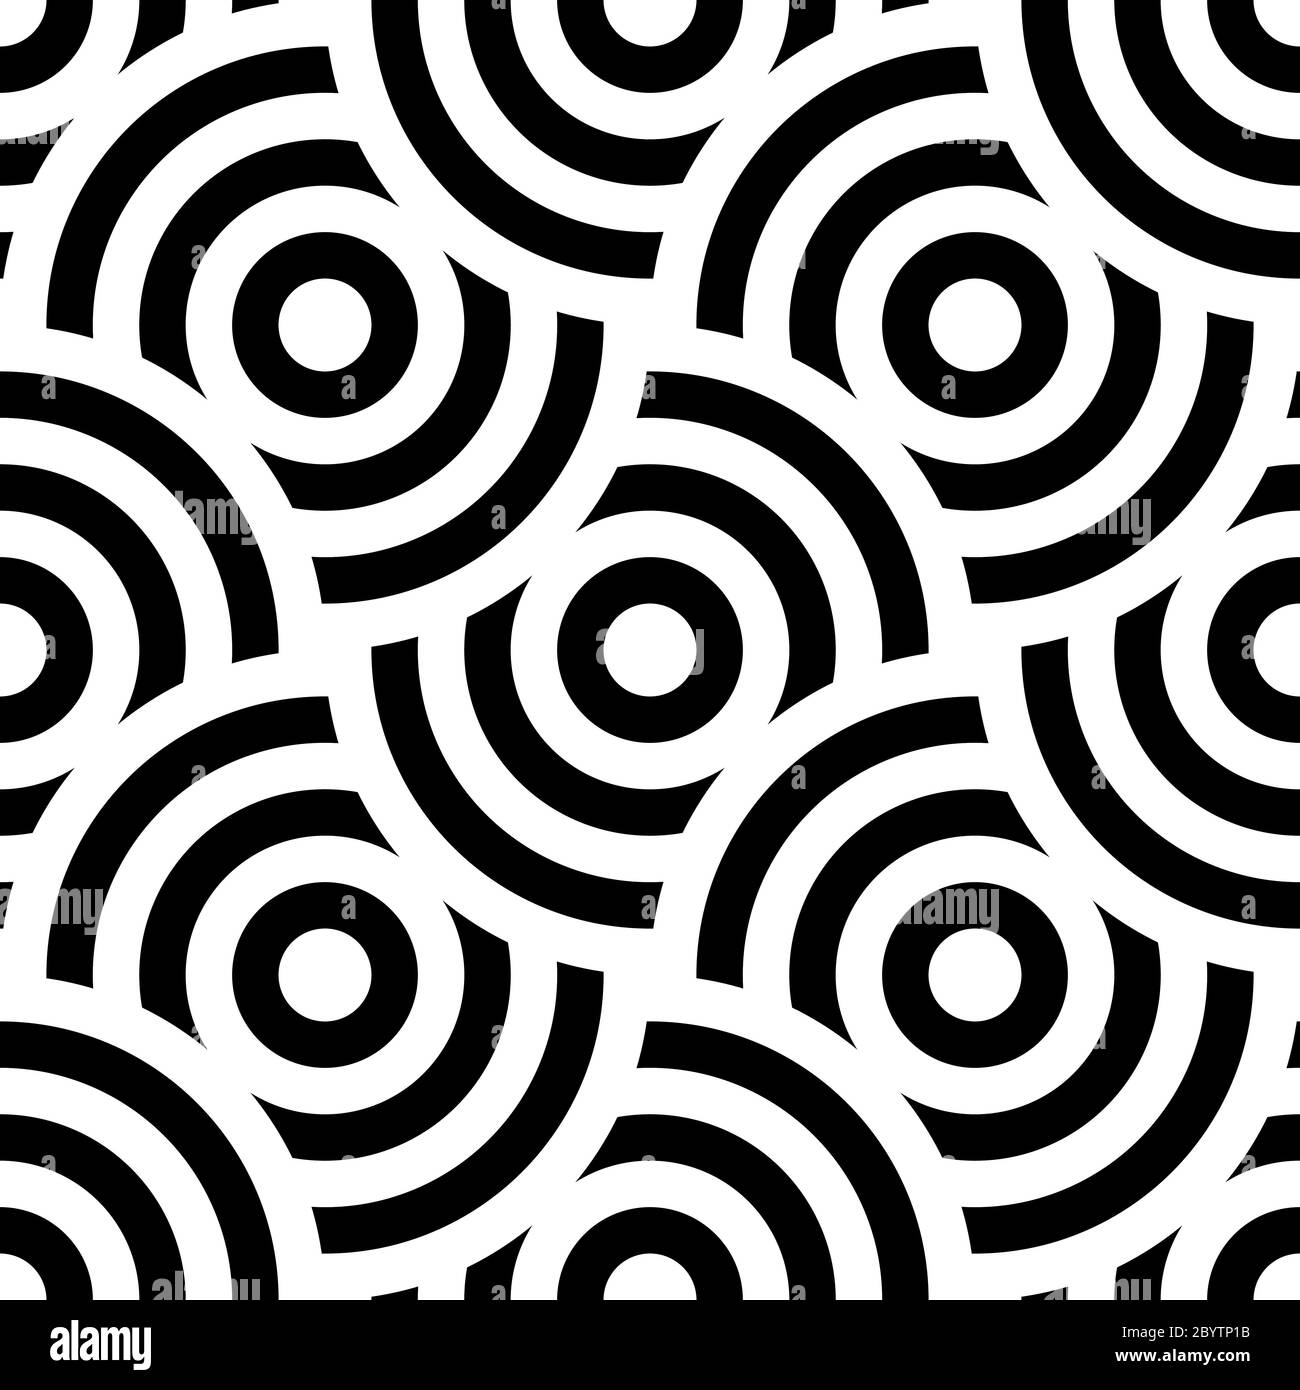 Seamless pattern background ornament of striped concentric circles. Retro mosaic of arches in black and white. Vector design element. Stock Vector